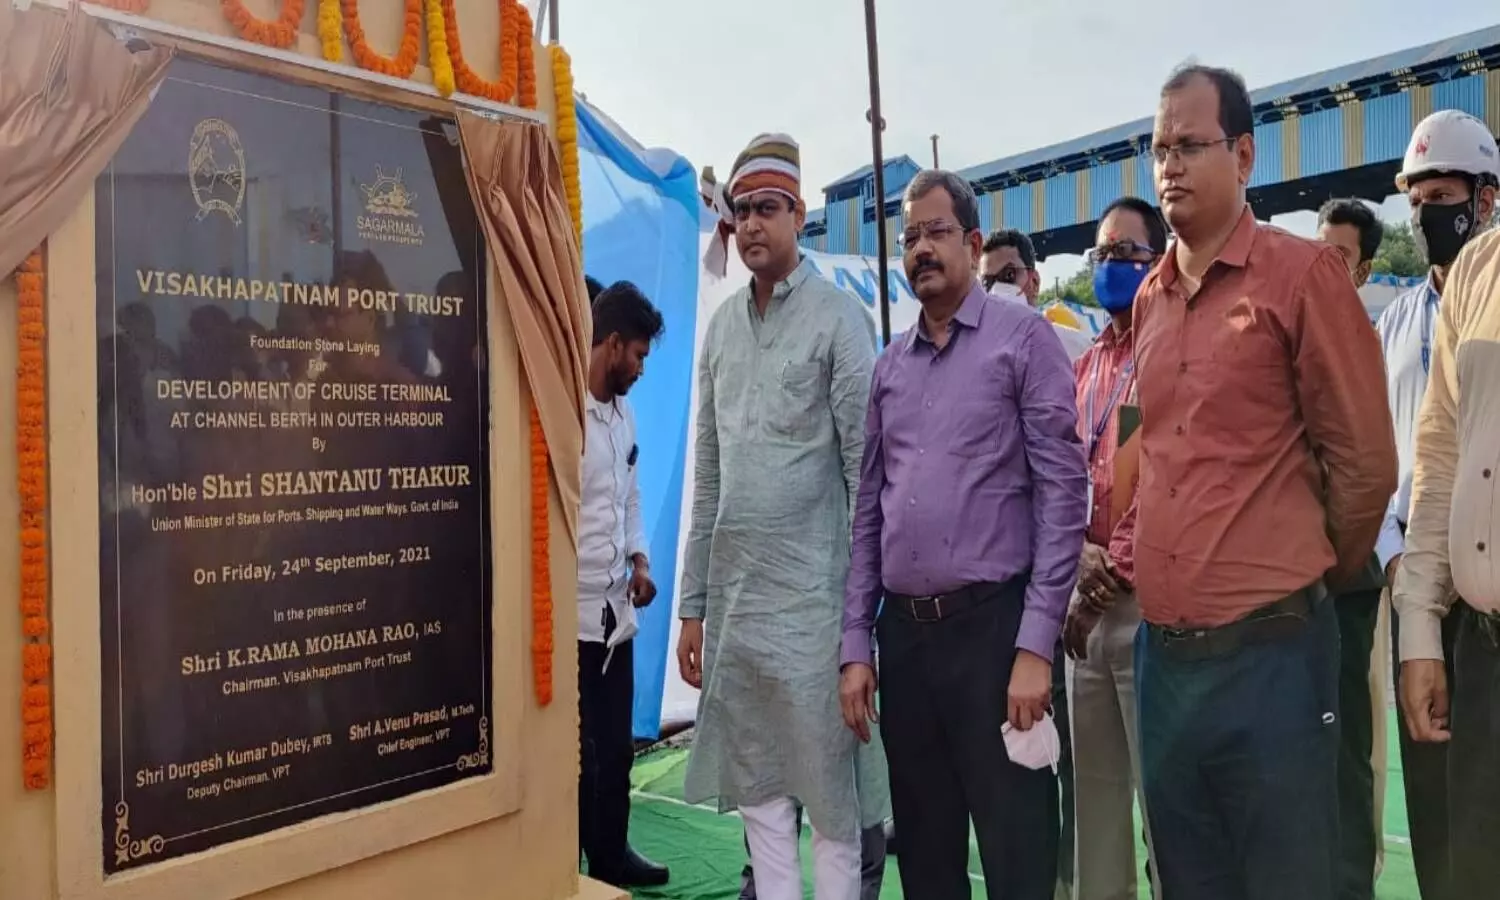 Union Minister lays stone for cruise terminal in Vizag